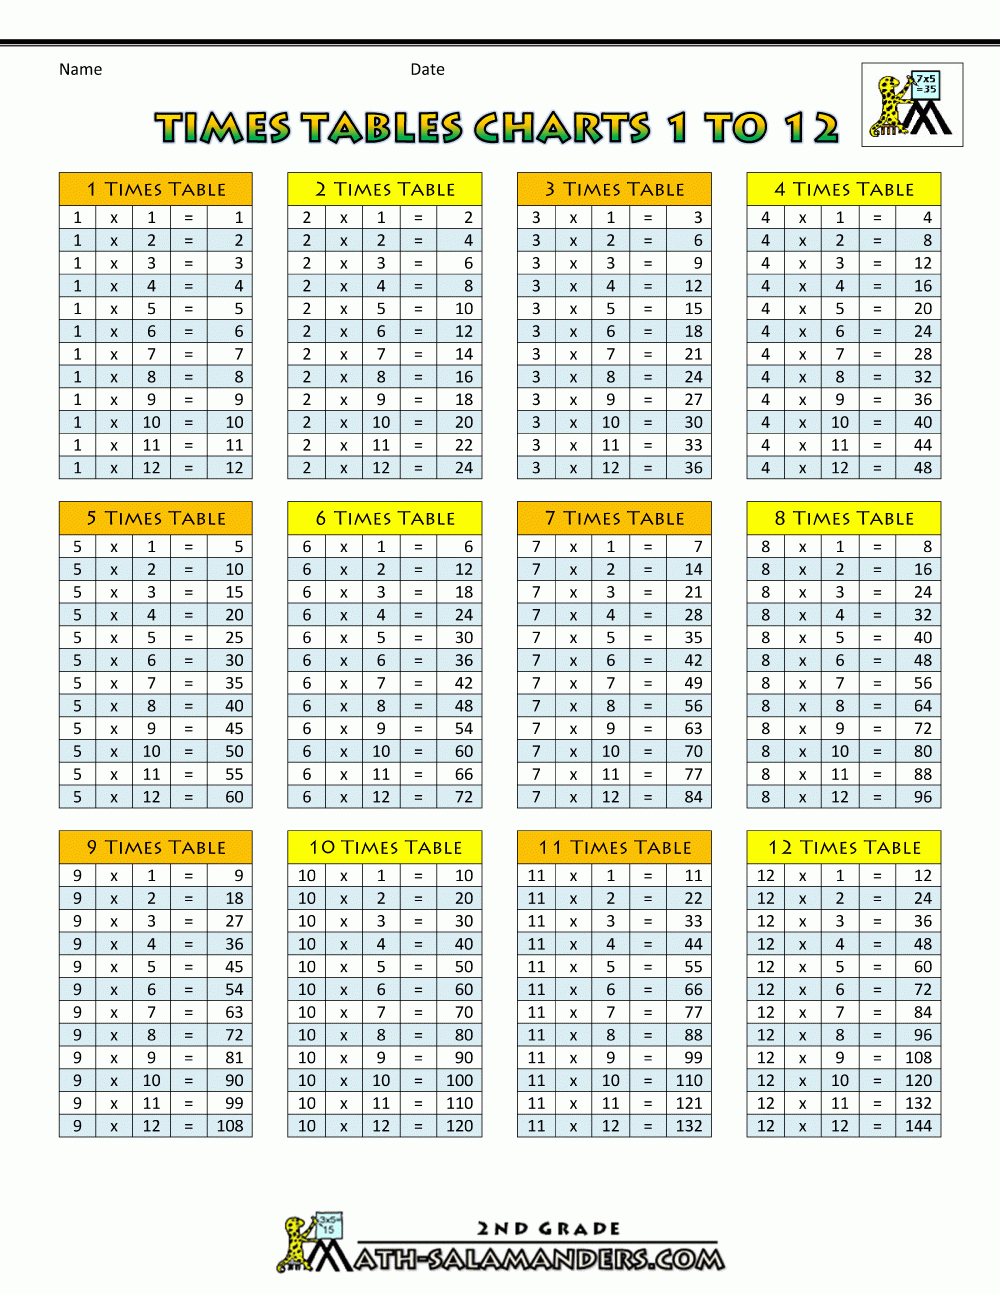 Times Tables Charts Up To 12 Times Table with regard to Printable Multiplication Table Up To 12